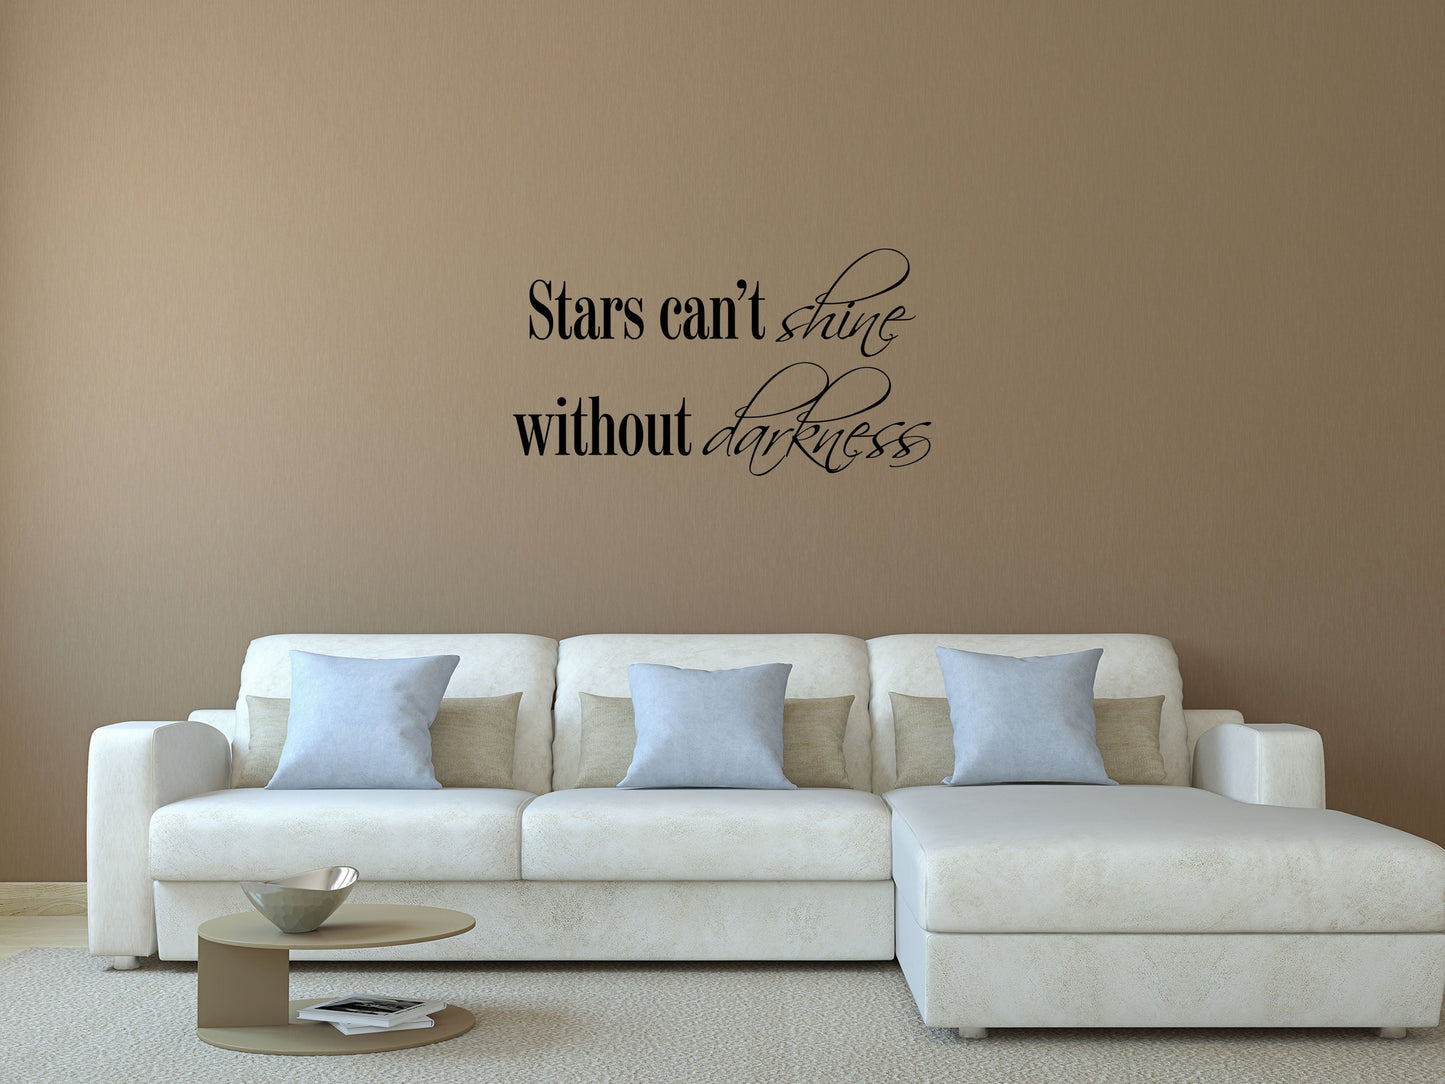 Stars Can't Shine Without Darkness - Inspirational Wall Decals Vinyl Wall Decal Inspirational Wall Signs 